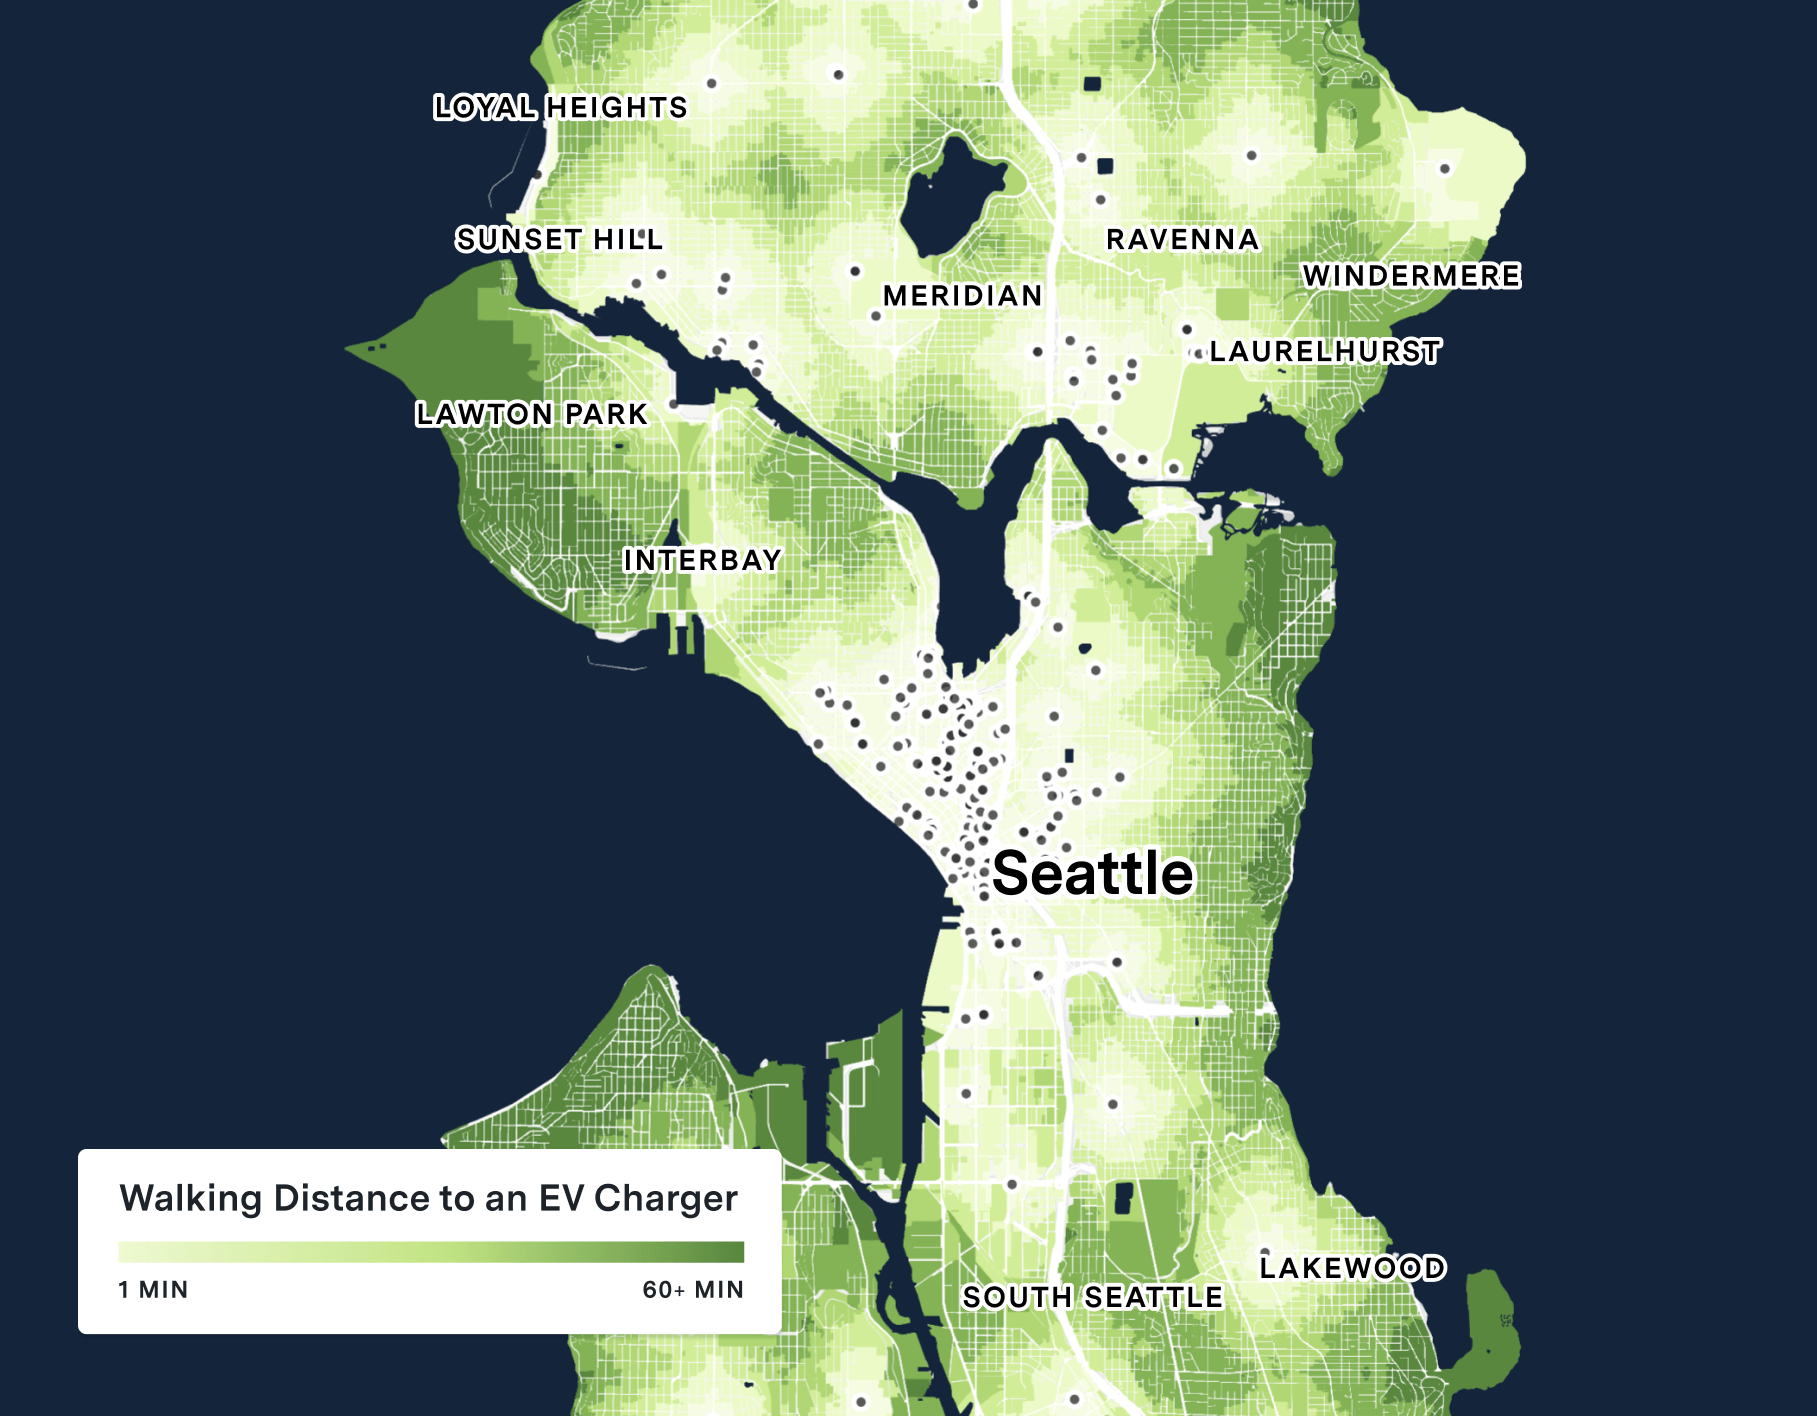 Map of Seattle showing walking distance to EV chargers